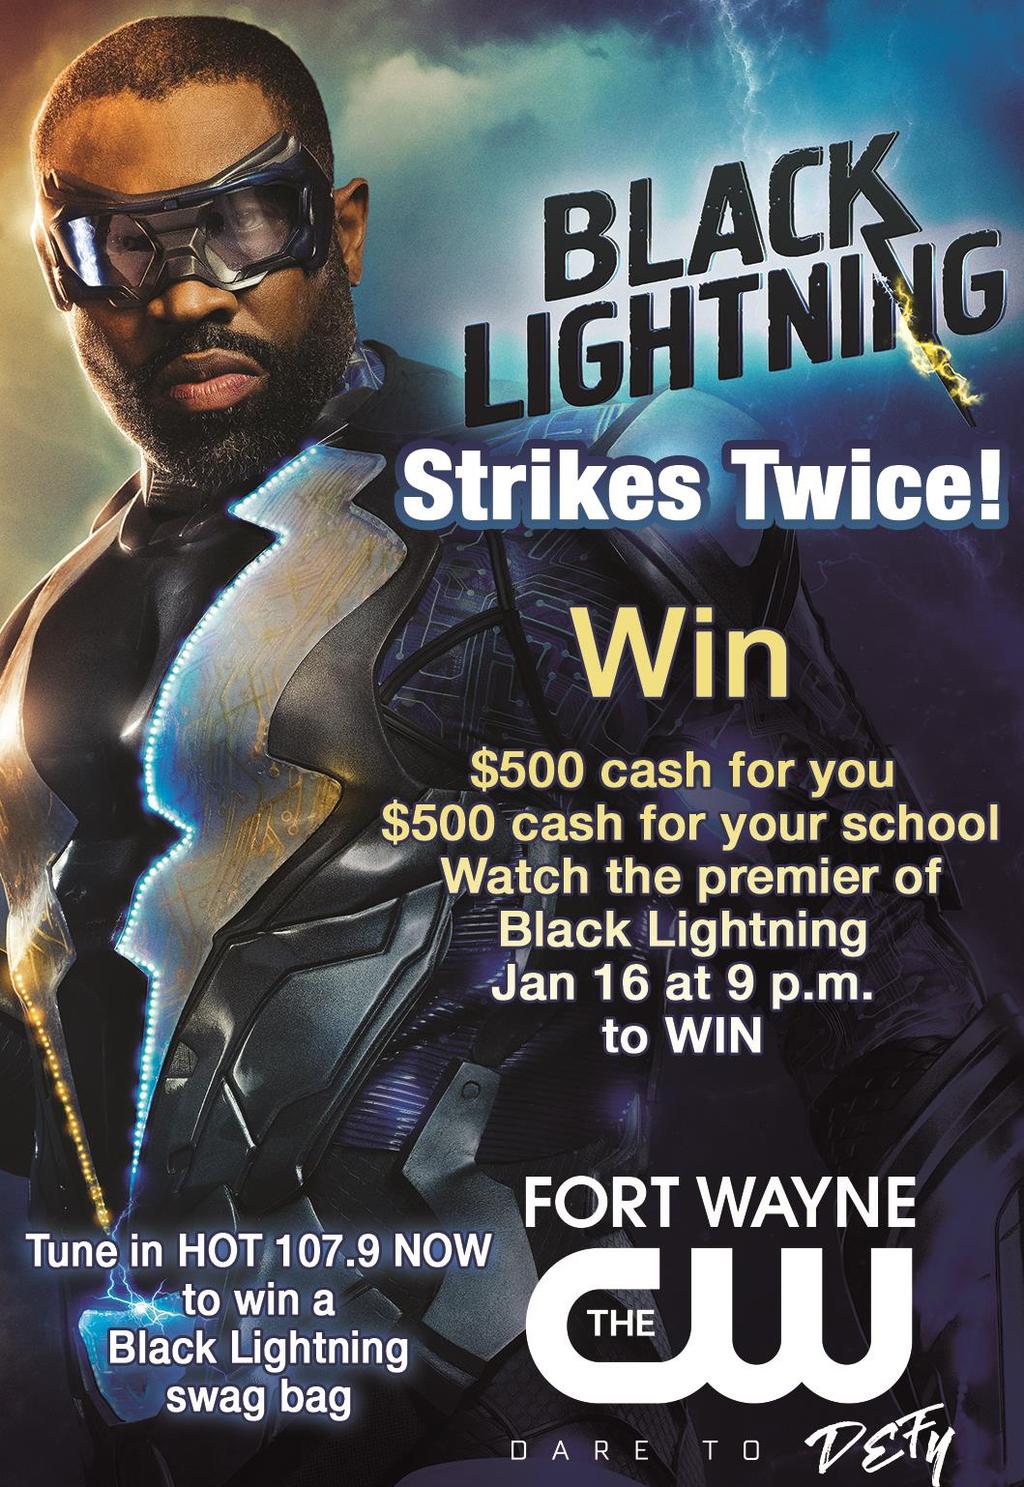 BLACK LIGHTNING STRIKES TWICE Official Rules 1. GENERAL: No purchase necessary. MAKING A PURCHASE WILL NOT INCREASE YOUR CHANCES OF WINNING. Void where prohibited or restricted by law.